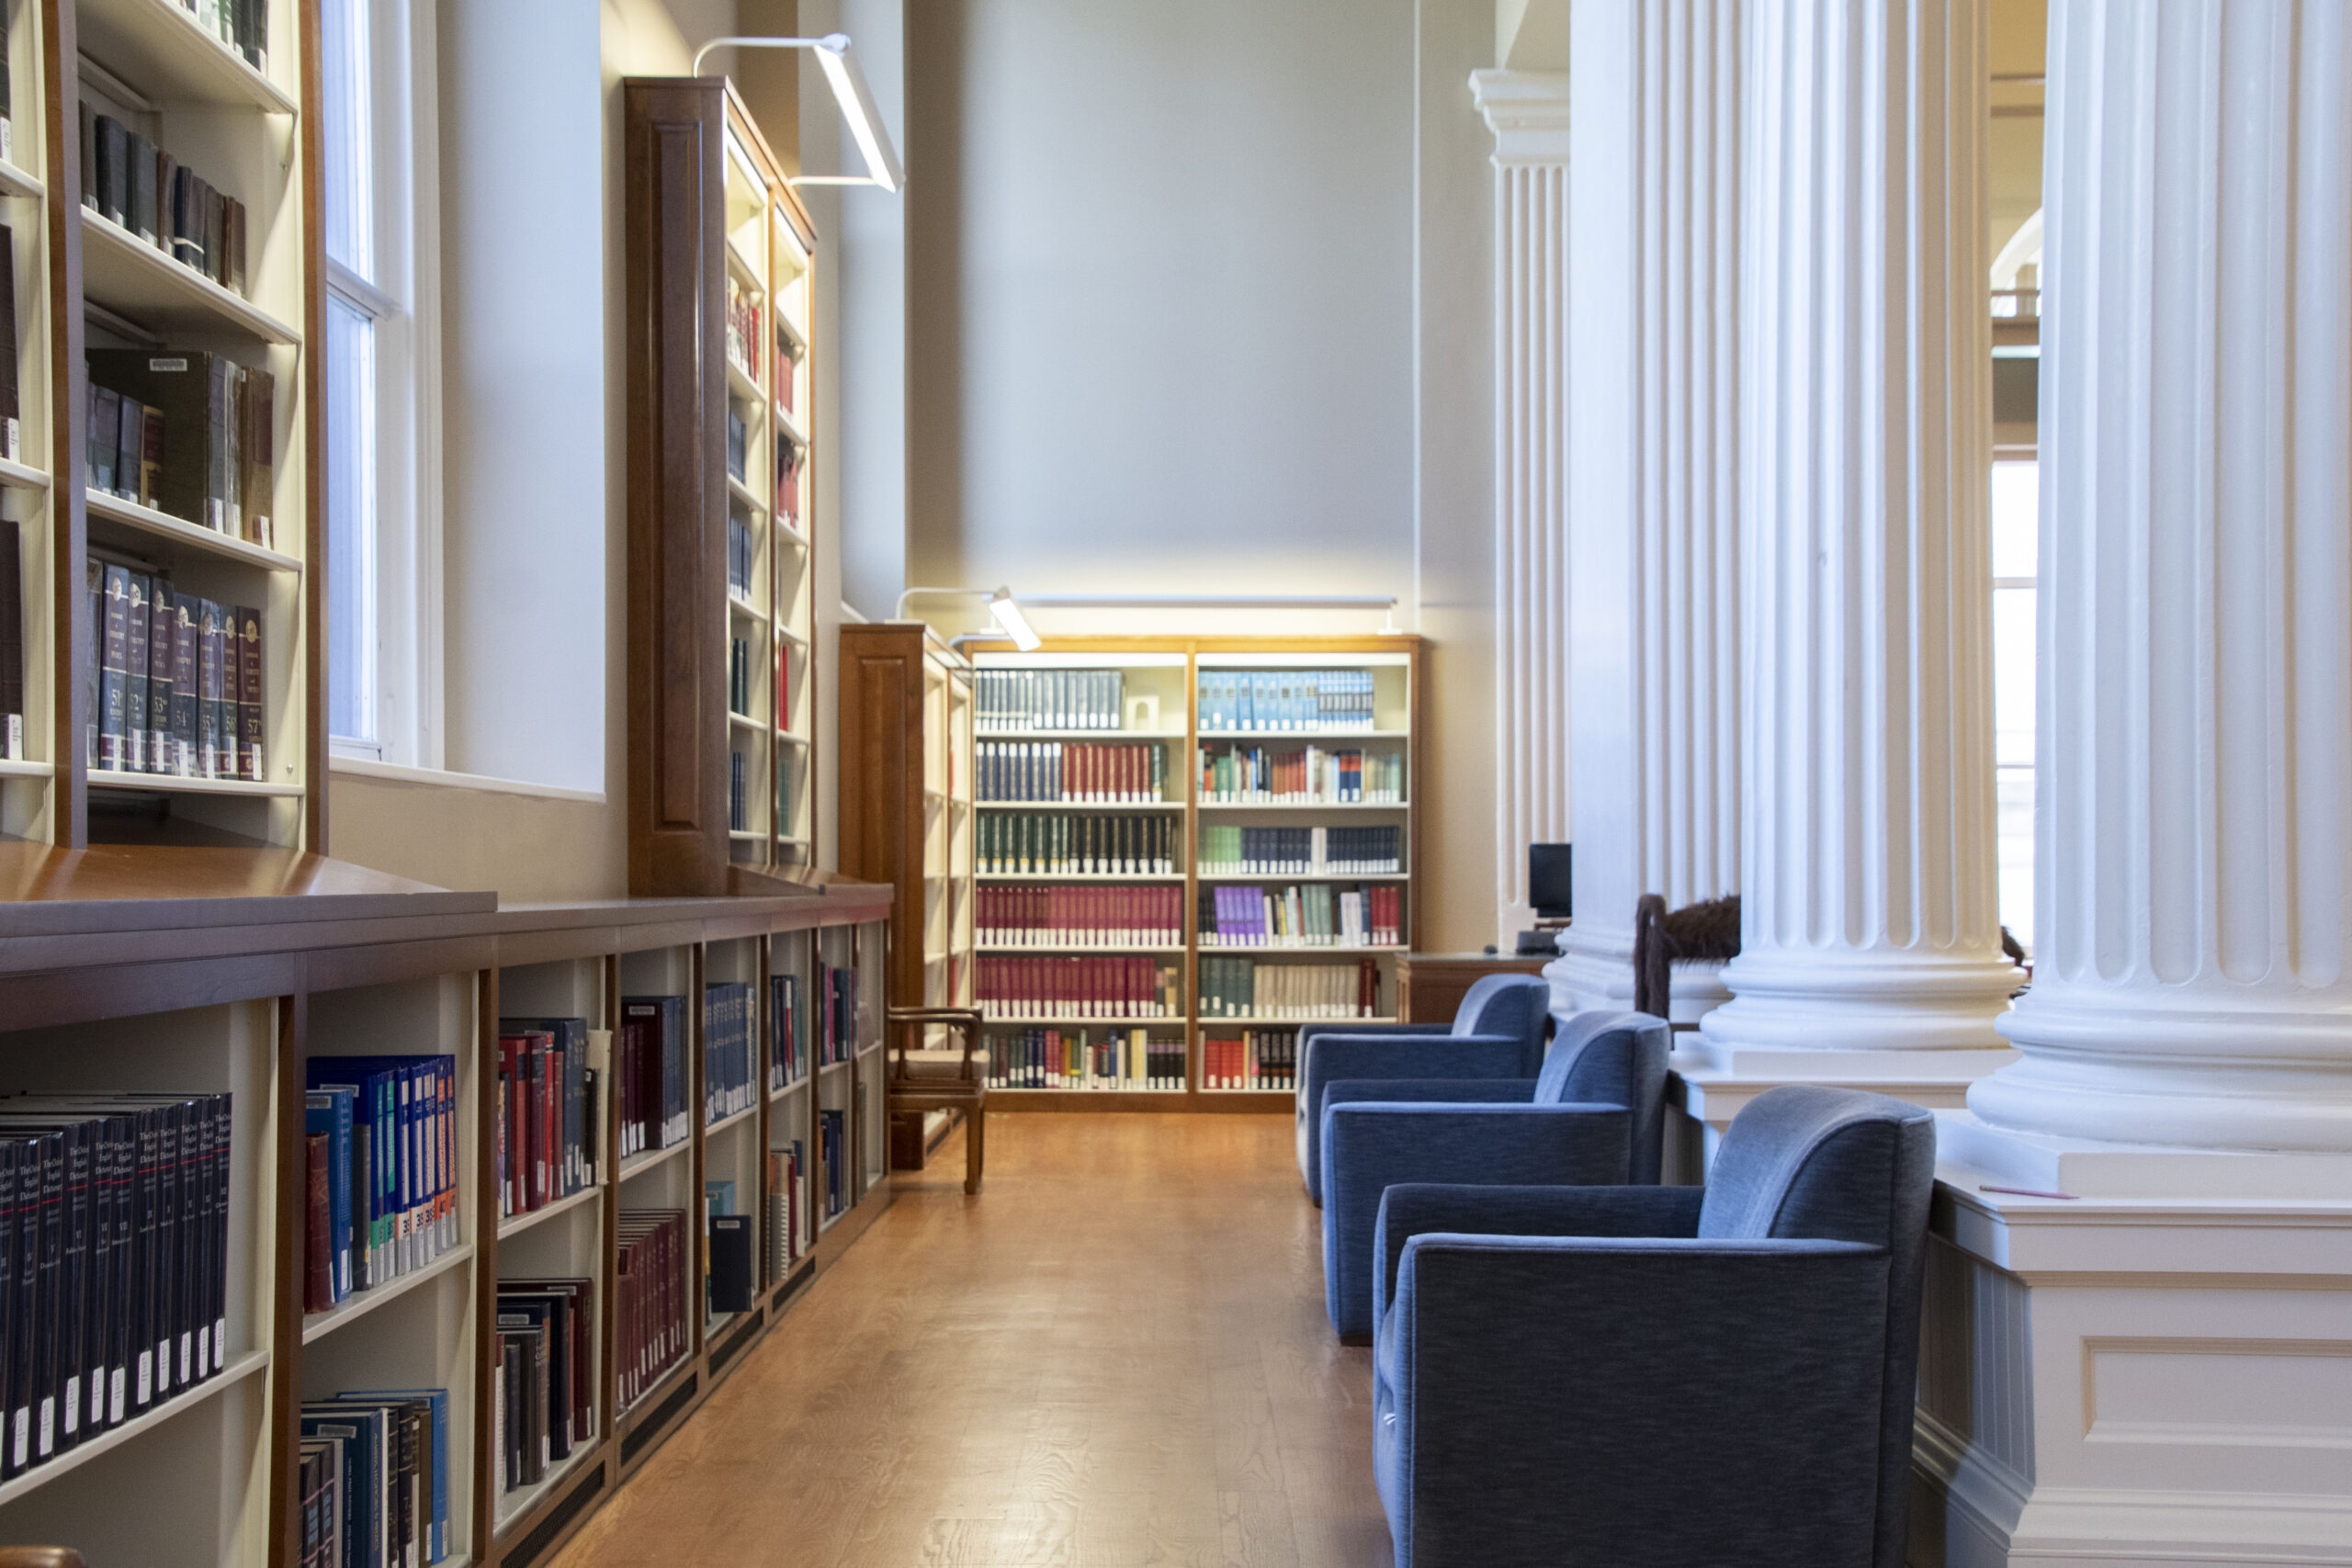 blue armchairs, shelves, columns in library